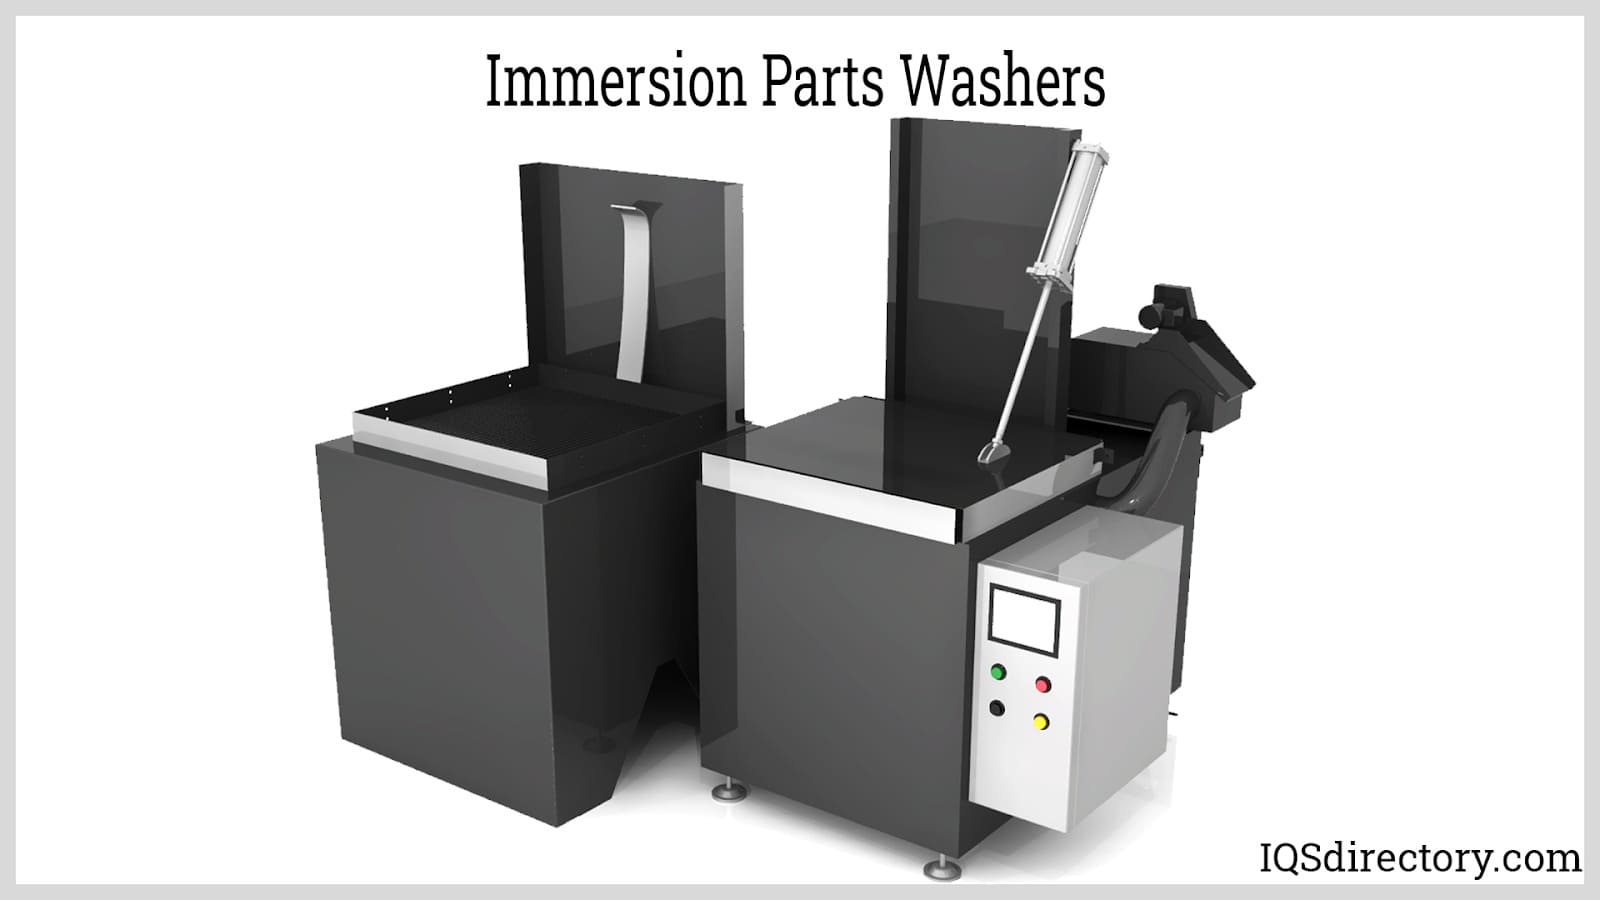 Immersion Parts Washers